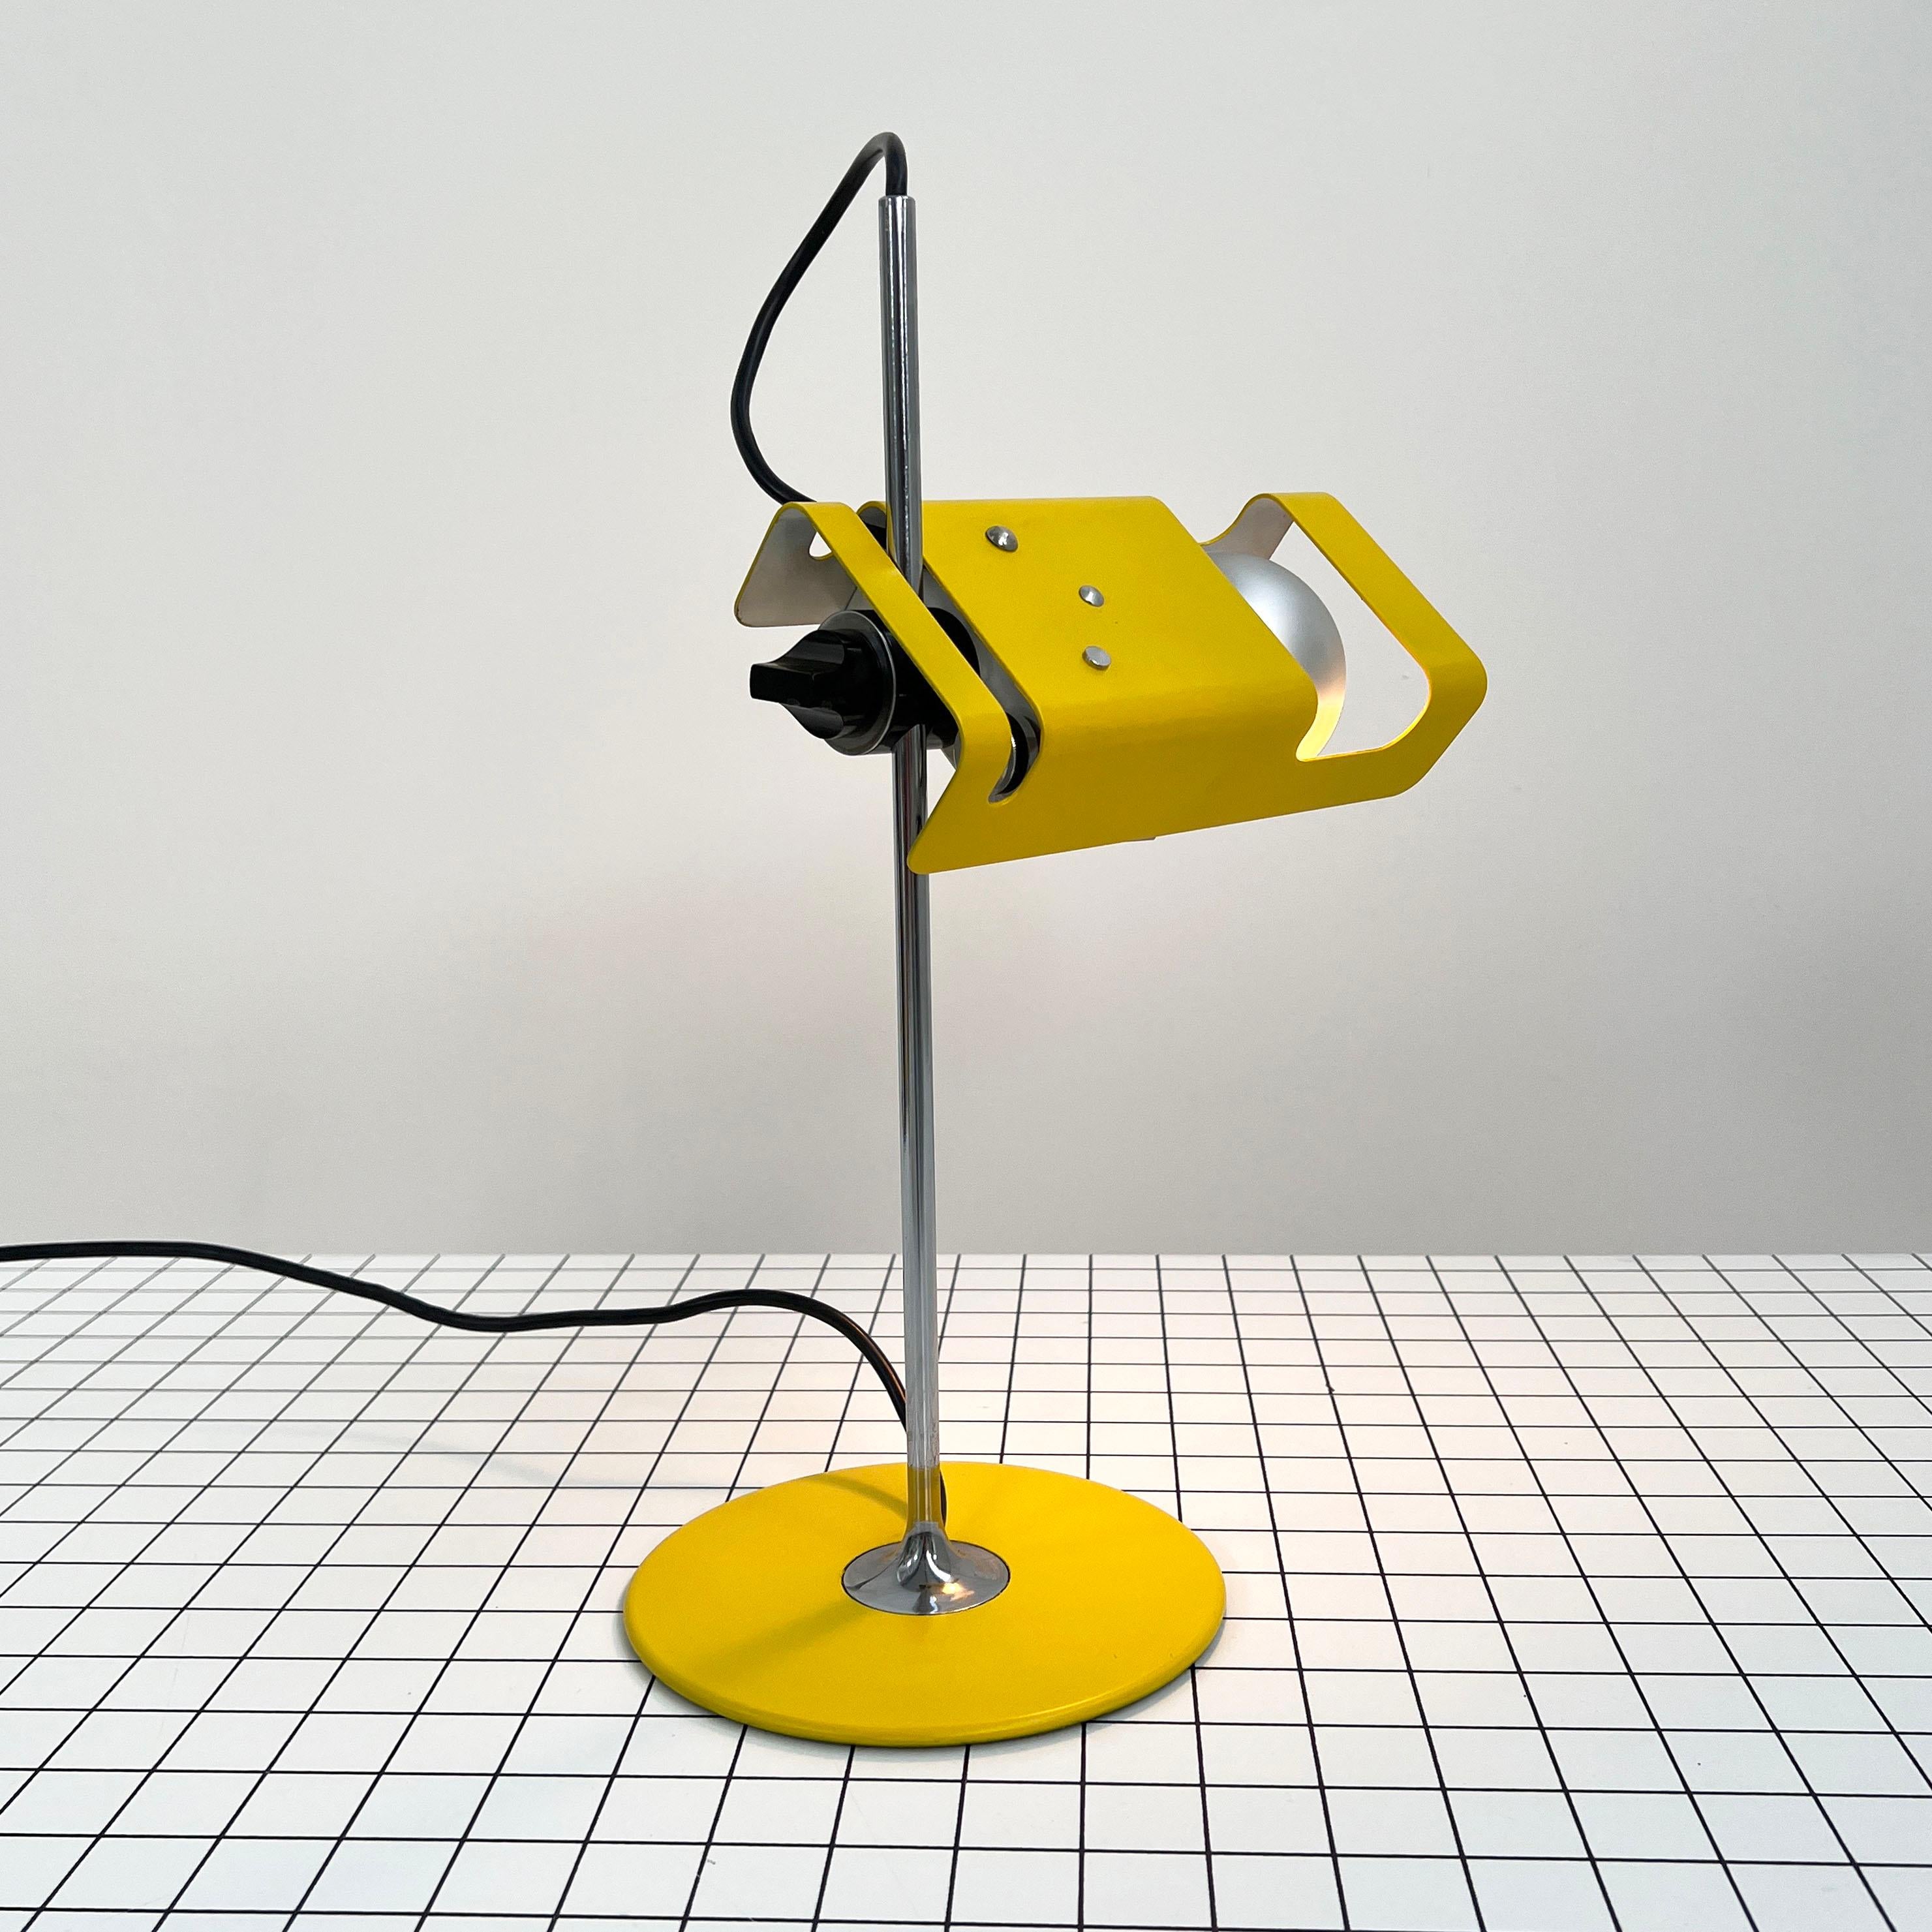 Yellow spider desk lamp by Joe Colombo for Oluce, 1960s
Designer - Joe Colombo
Producer - Oluce
Model - Spider Table Lamp 
Design Period - Sixties
Measurements - Width 28,5 cm x Depth 28,5 cm x Height 43 cm
Materials - Metal
Color - Yellow,